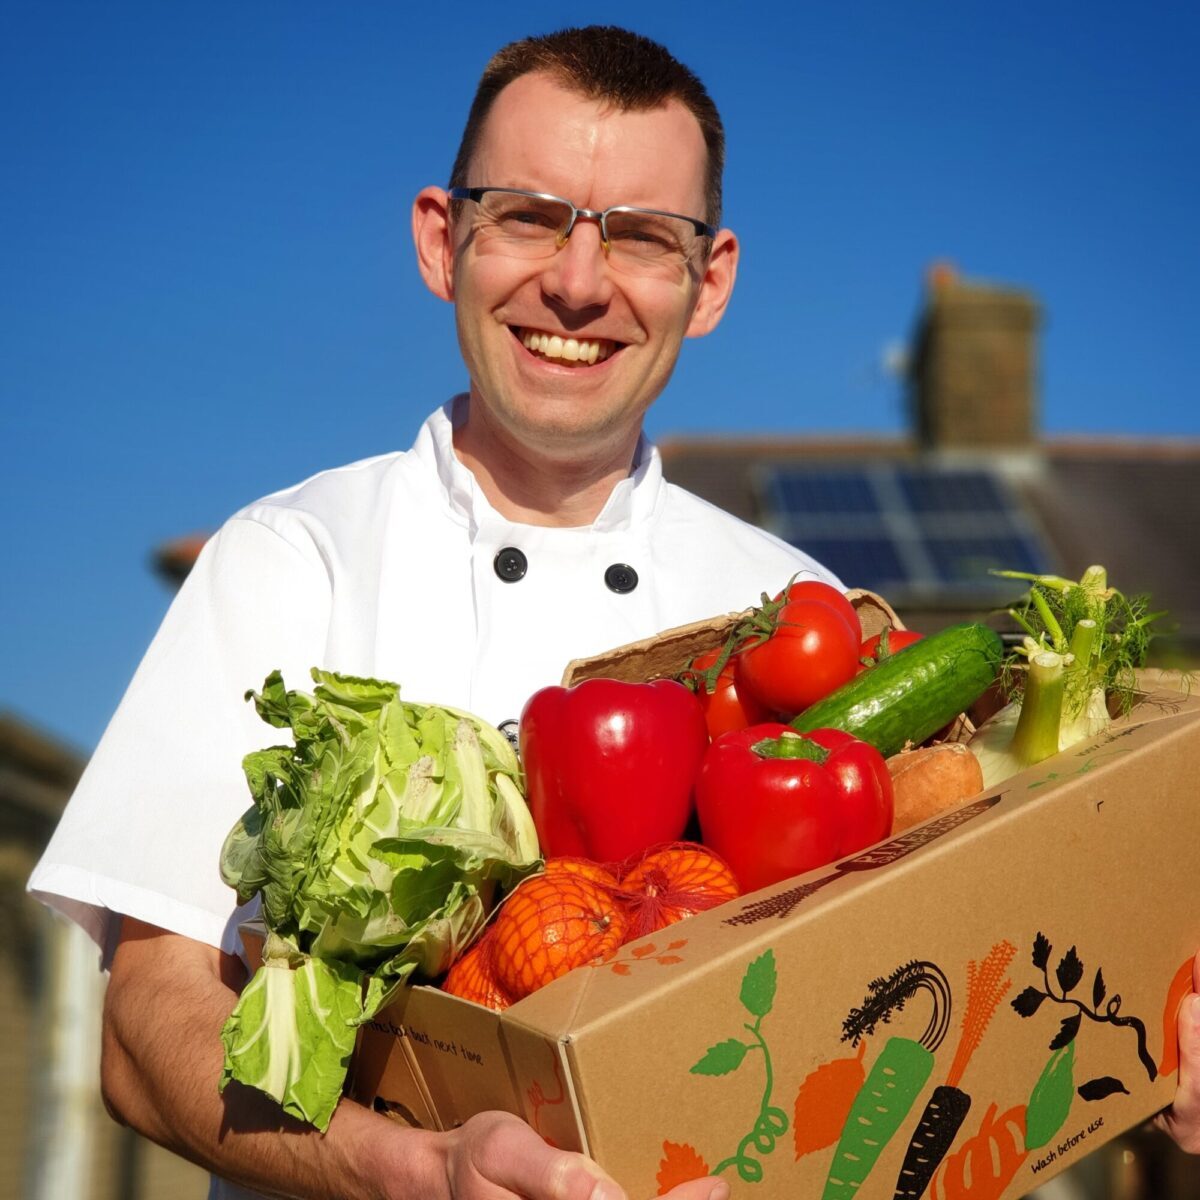 Shaun Nixon the cook in the north carrying a box of organic vegetables